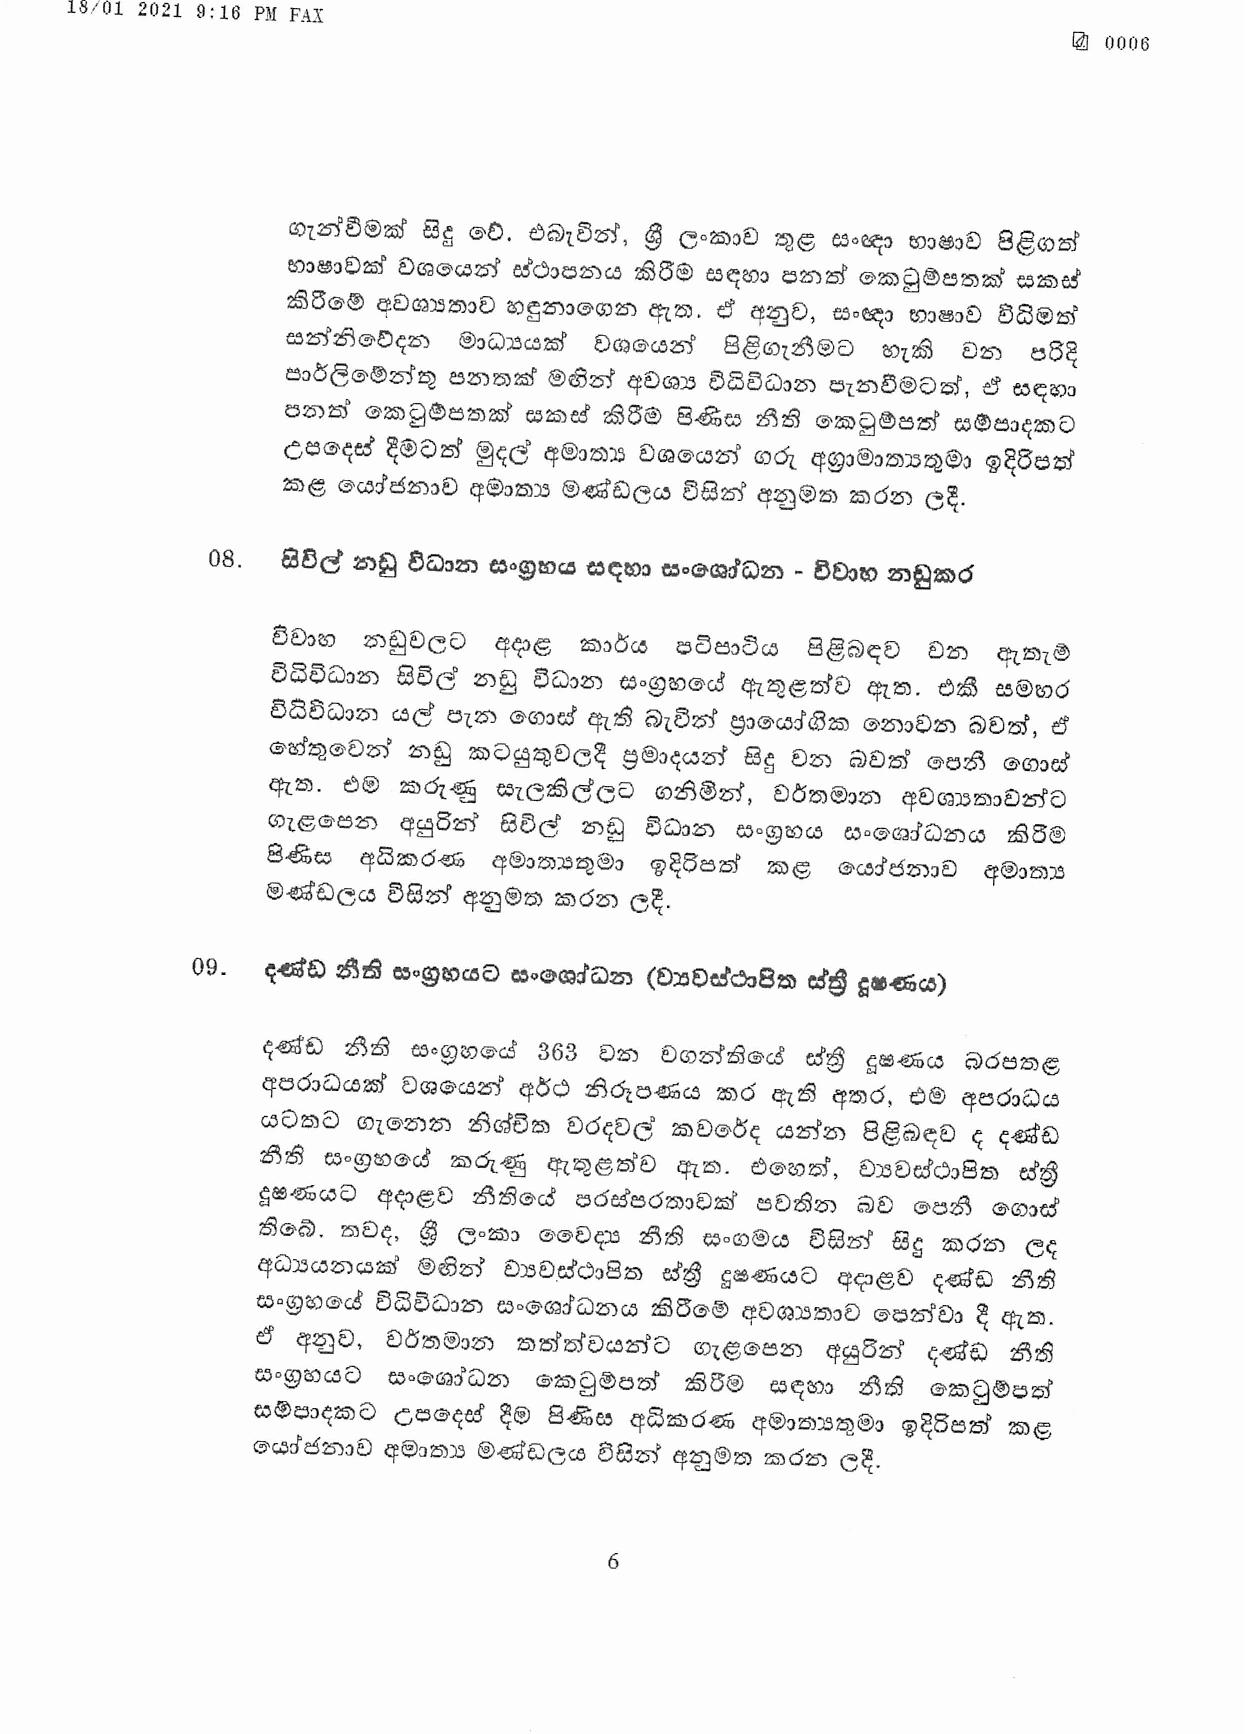 Cabinet Decision on 18.01.2021 page 006